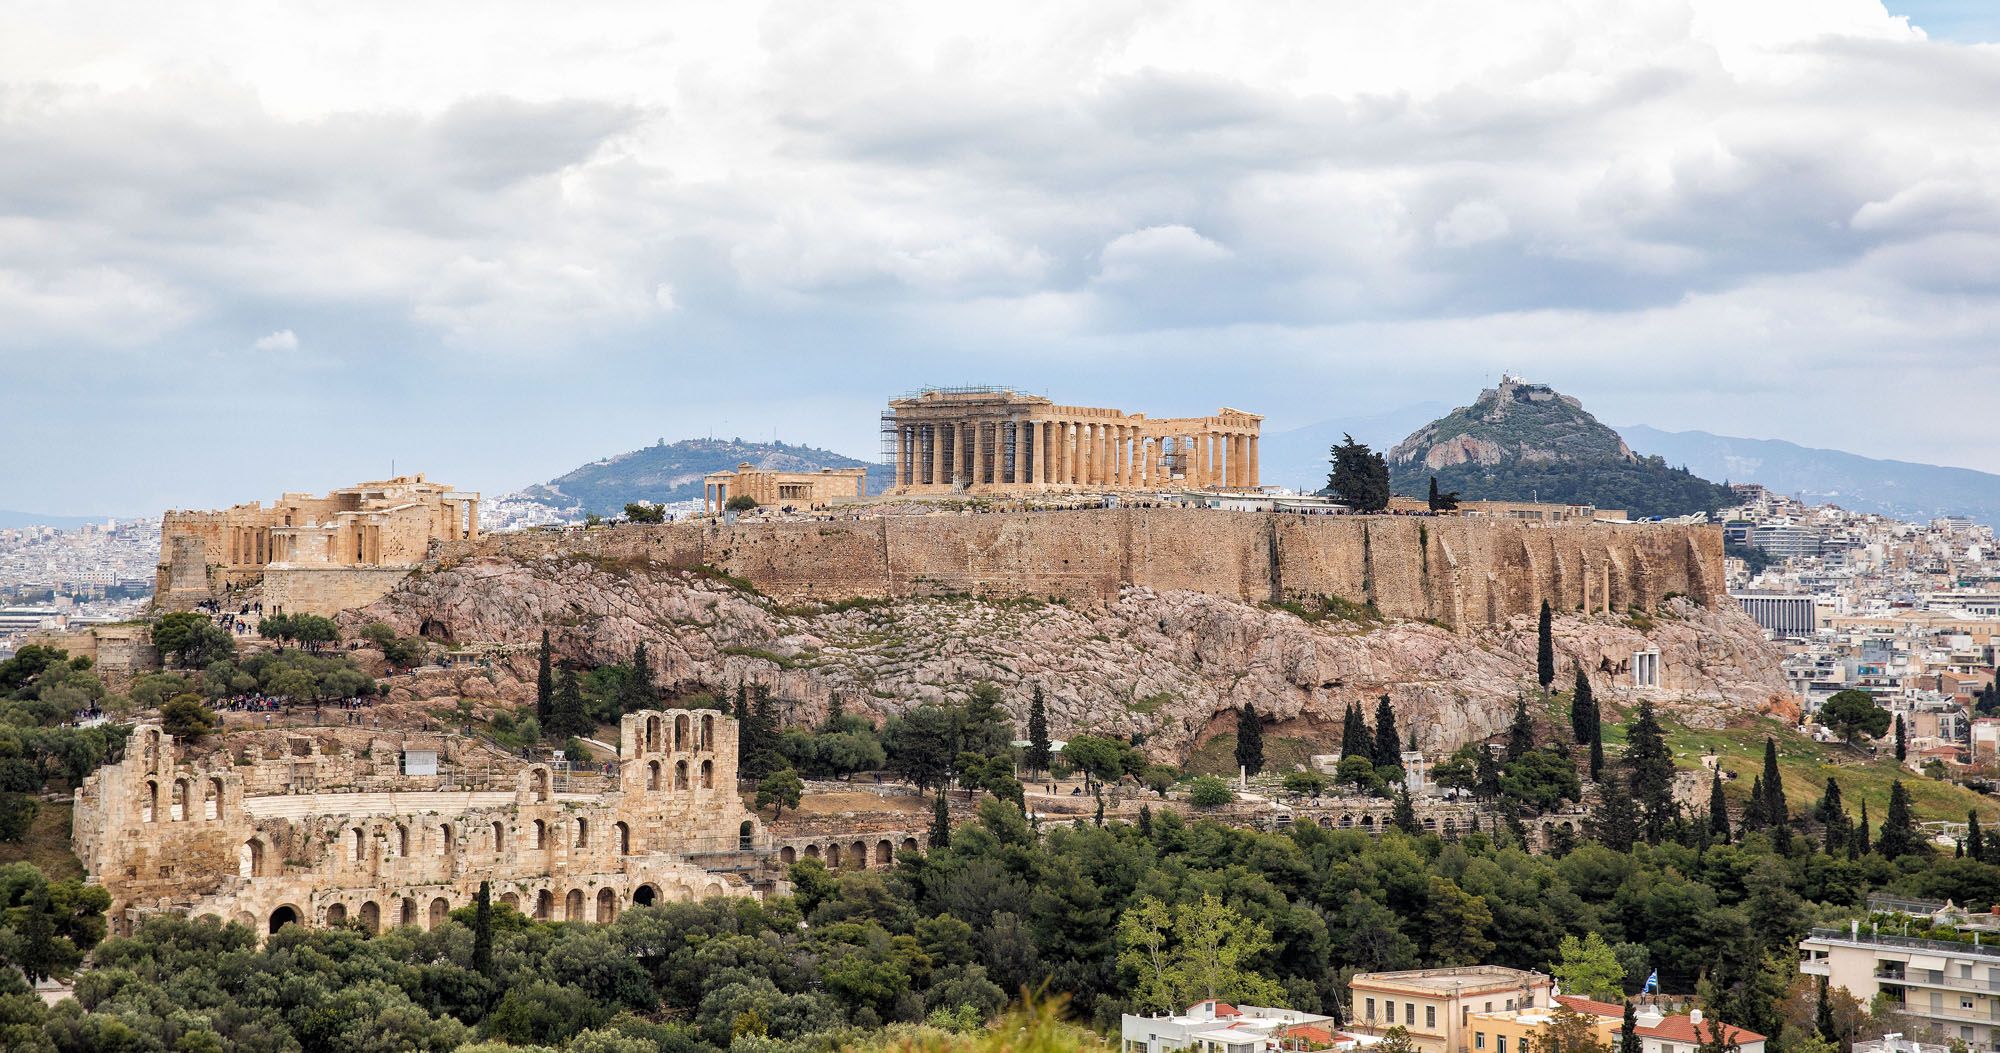 Featured image for “Best Views of Athens and the Acropolis: 9 Great Spots to Try”